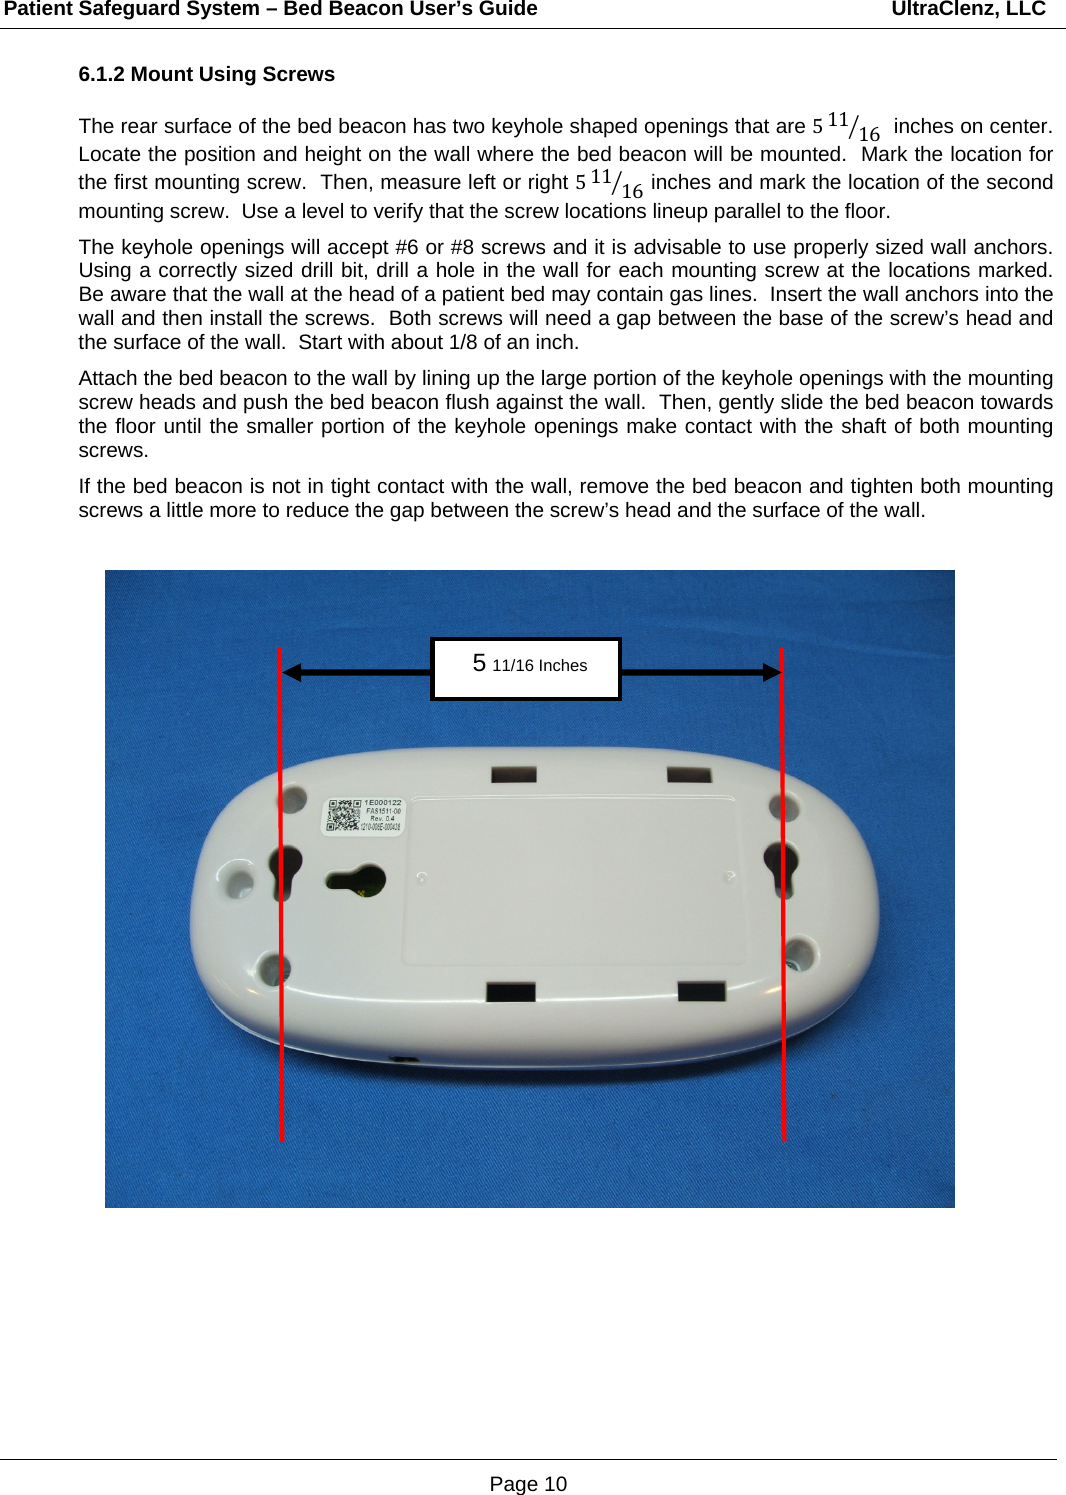 Patient Safeguard System – Bed Beacon User’s Guide                                                             UltraClenz, LLC Page 10 6.1.2 Mount Using Screws  The rear surface of the bed beacon has two keyhole shaped openings that are 511 16  inches on center.  Locate the position and height on the wall where the bed beacon will be mounted.  Mark the location for the first mounting screw.  Then, measure left or right 511 16 inches and mark the location of the second mounting screw.  Use a level to verify that the screw locations lineup parallel to the floor.    The keyhole openings will accept #6 or #8 screws and it is advisable to use properly sized wall anchors.  Using a correctly sized drill bit, drill a hole in the wall for each mounting screw at the locations marked.  Be aware that the wall at the head of a patient bed may contain gas lines.  Insert the wall anchors into the wall and then install the screws.  Both screws will need a gap between the base of the screw’s head and the surface of the wall.  Start with about 1/8 of an inch.  Attach the bed beacon to the wall by lining up the large portion of the keyhole openings with the mounting screw heads and push the bed beacon flush against the wall.  Then, gently slide the bed beacon towards the floor until the smaller portion of the keyhole openings make contact with the shaft of both mounting screws.    If the bed beacon is not in tight contact with the wall, remove the bed beacon and tighten both mounting screws a little more to reduce the gap between the screw’s head and the surface of the wall.                  5 11/16 Inches 